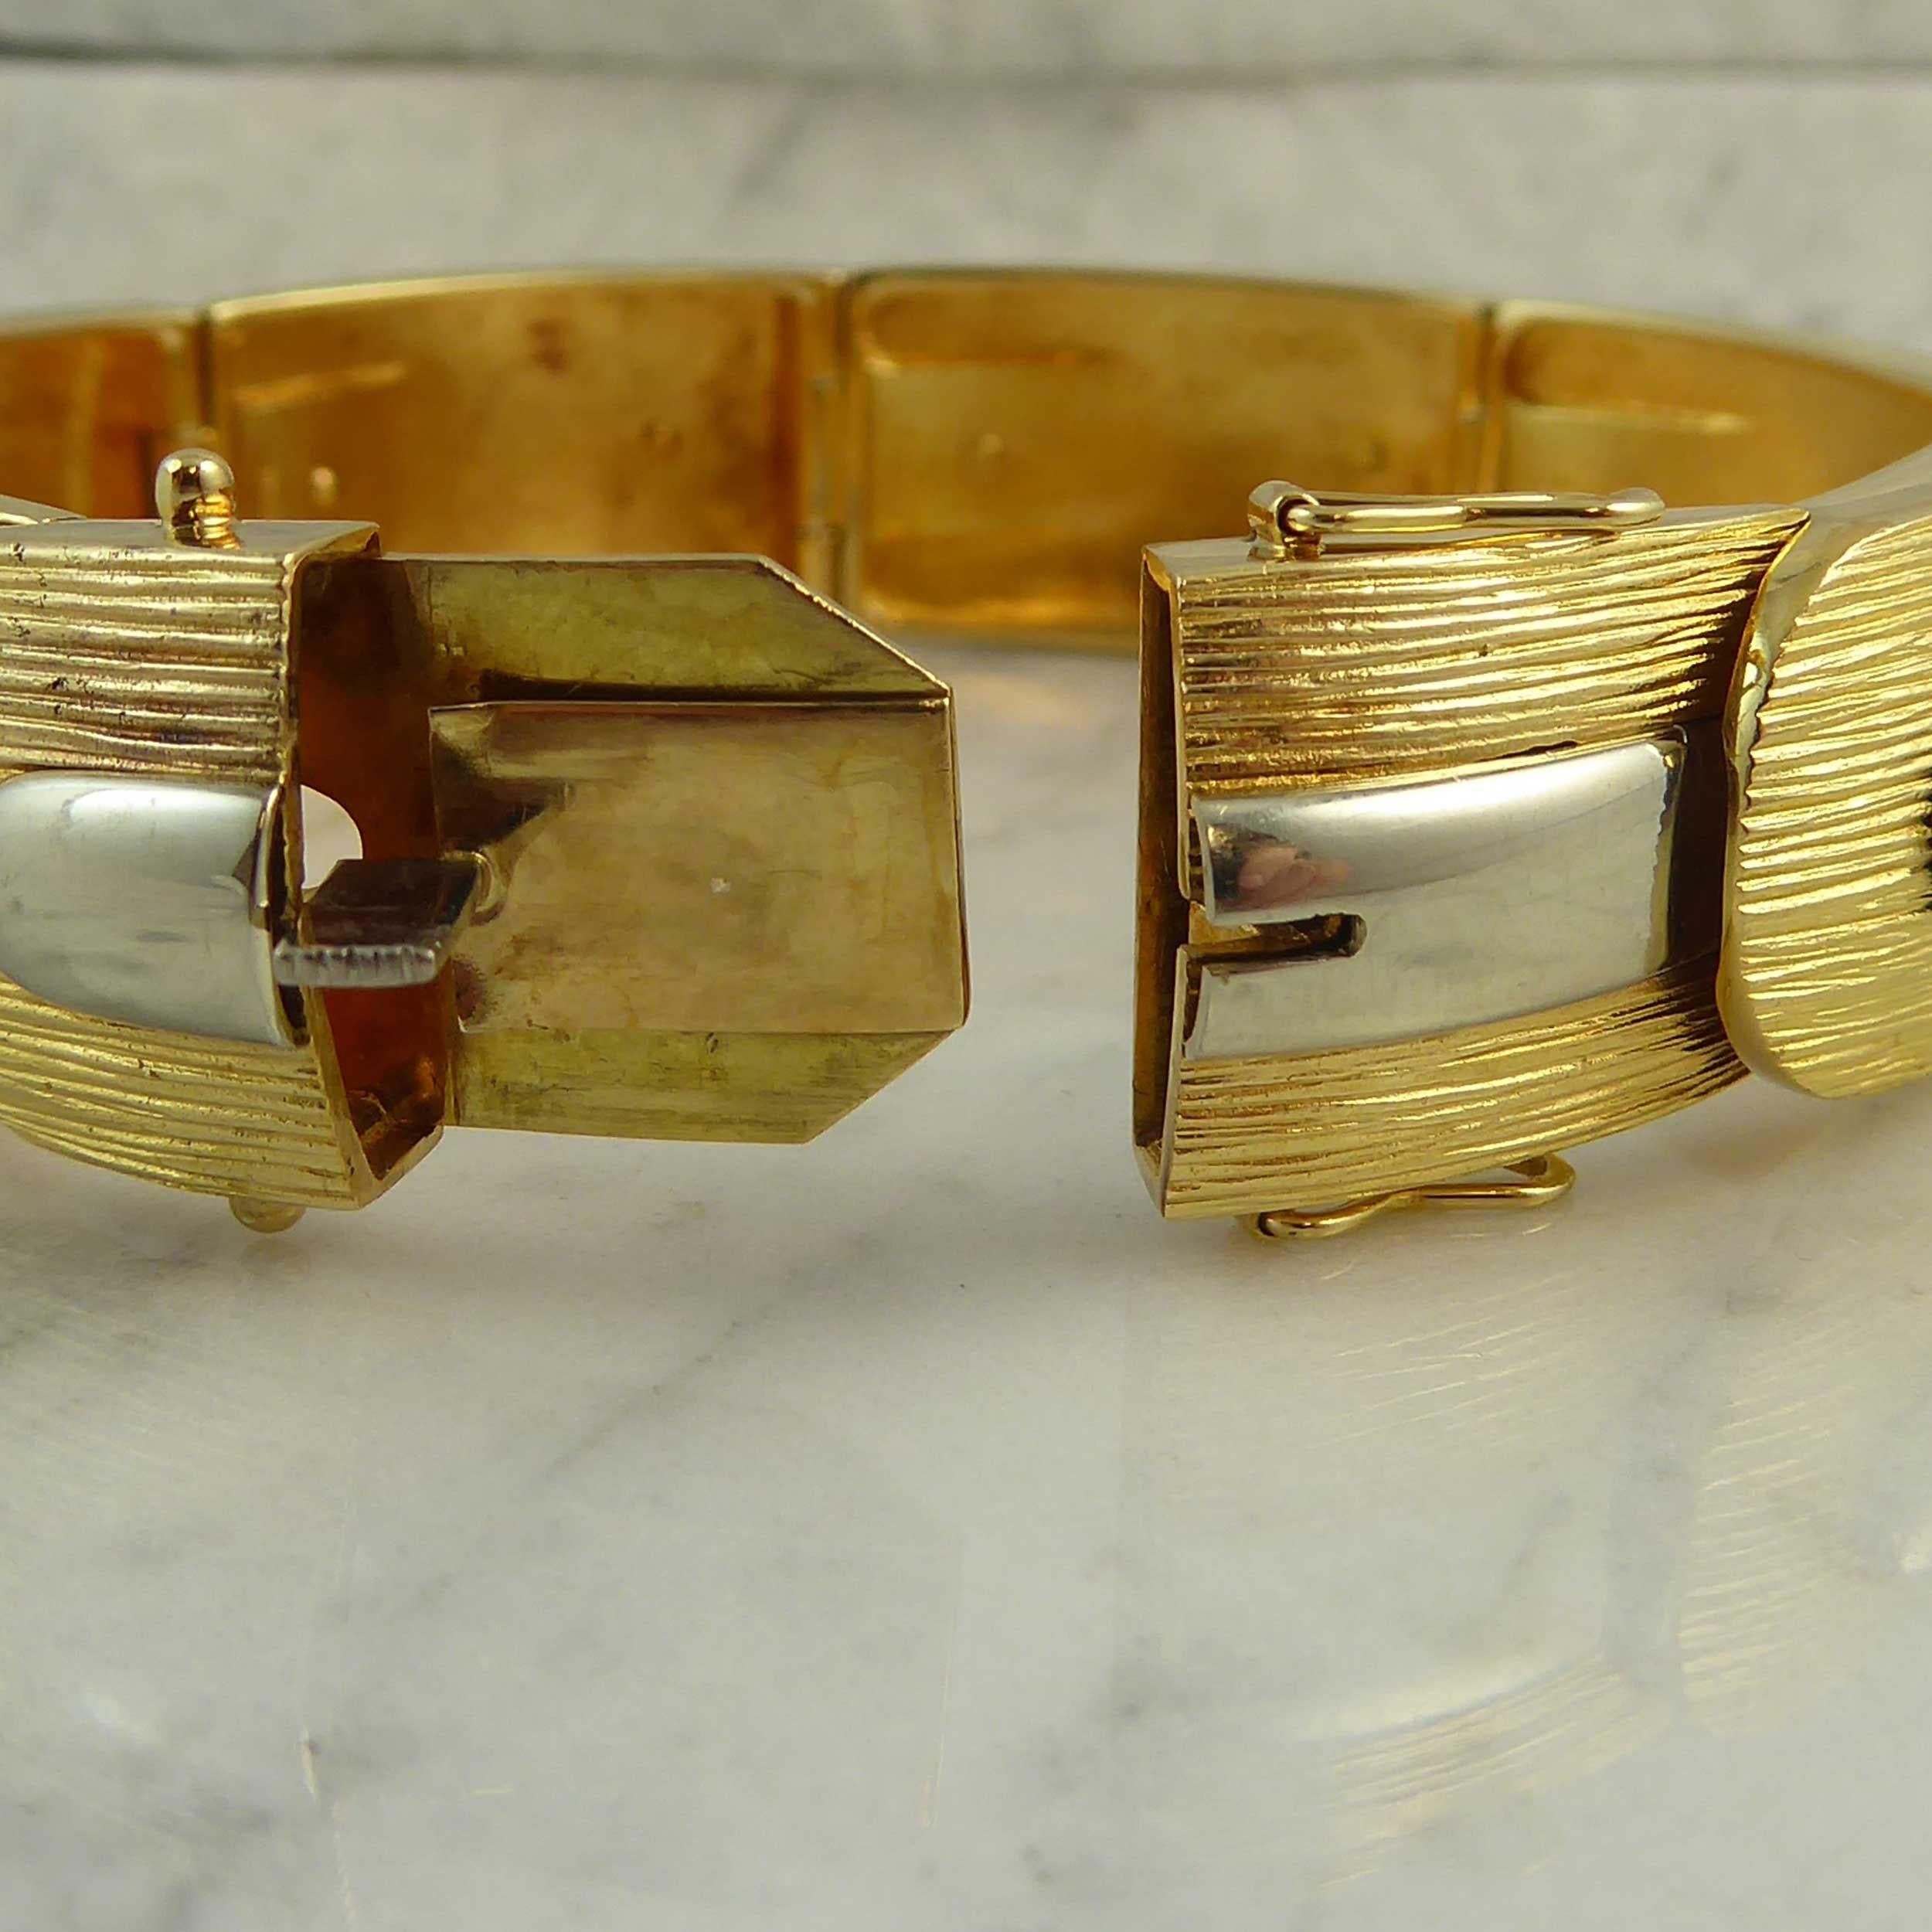 Vintage Designer Bracelet 1974, Lapponia Finland, Yellow and White Gold, Nordic In Good Condition For Sale In Yorkshire, West Yorkshire